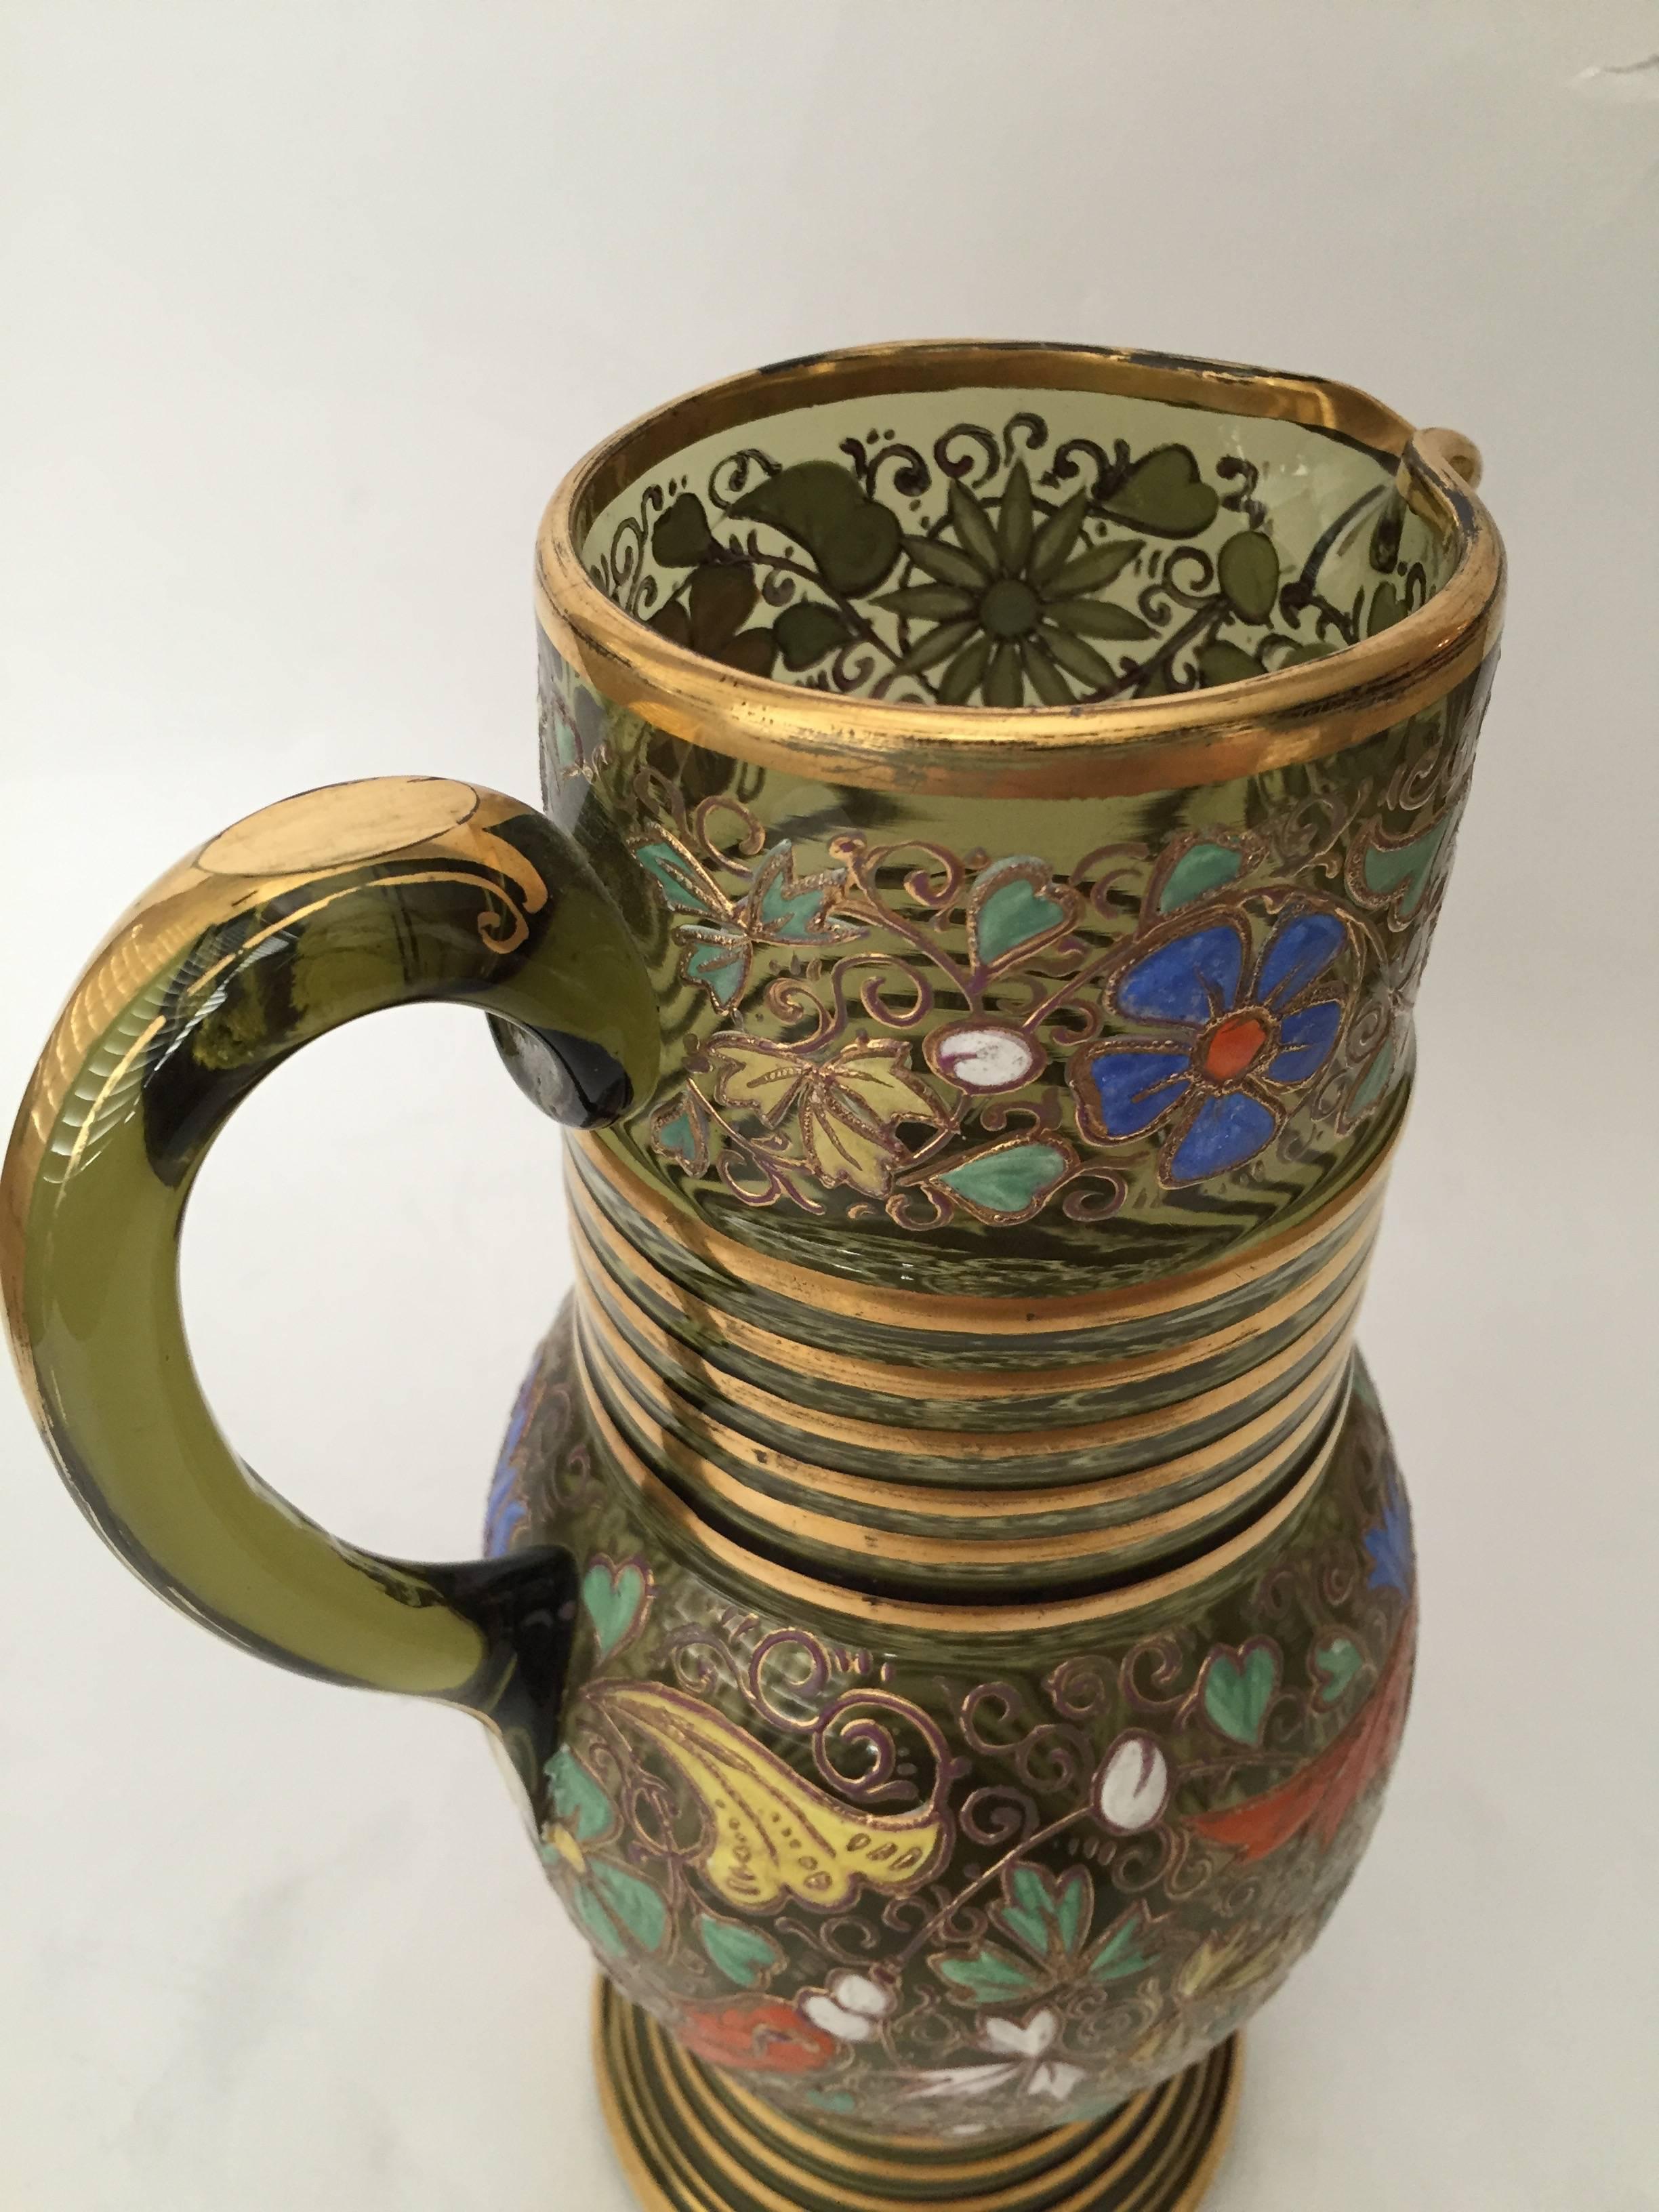 An exceptional Moser pitcher richly decorated with raised paste gold and beautiful polychrome enamels perfect for the holidays and for display on the bar or a cabinet. Moser is still in business, known to be the king of glass, made for the royal